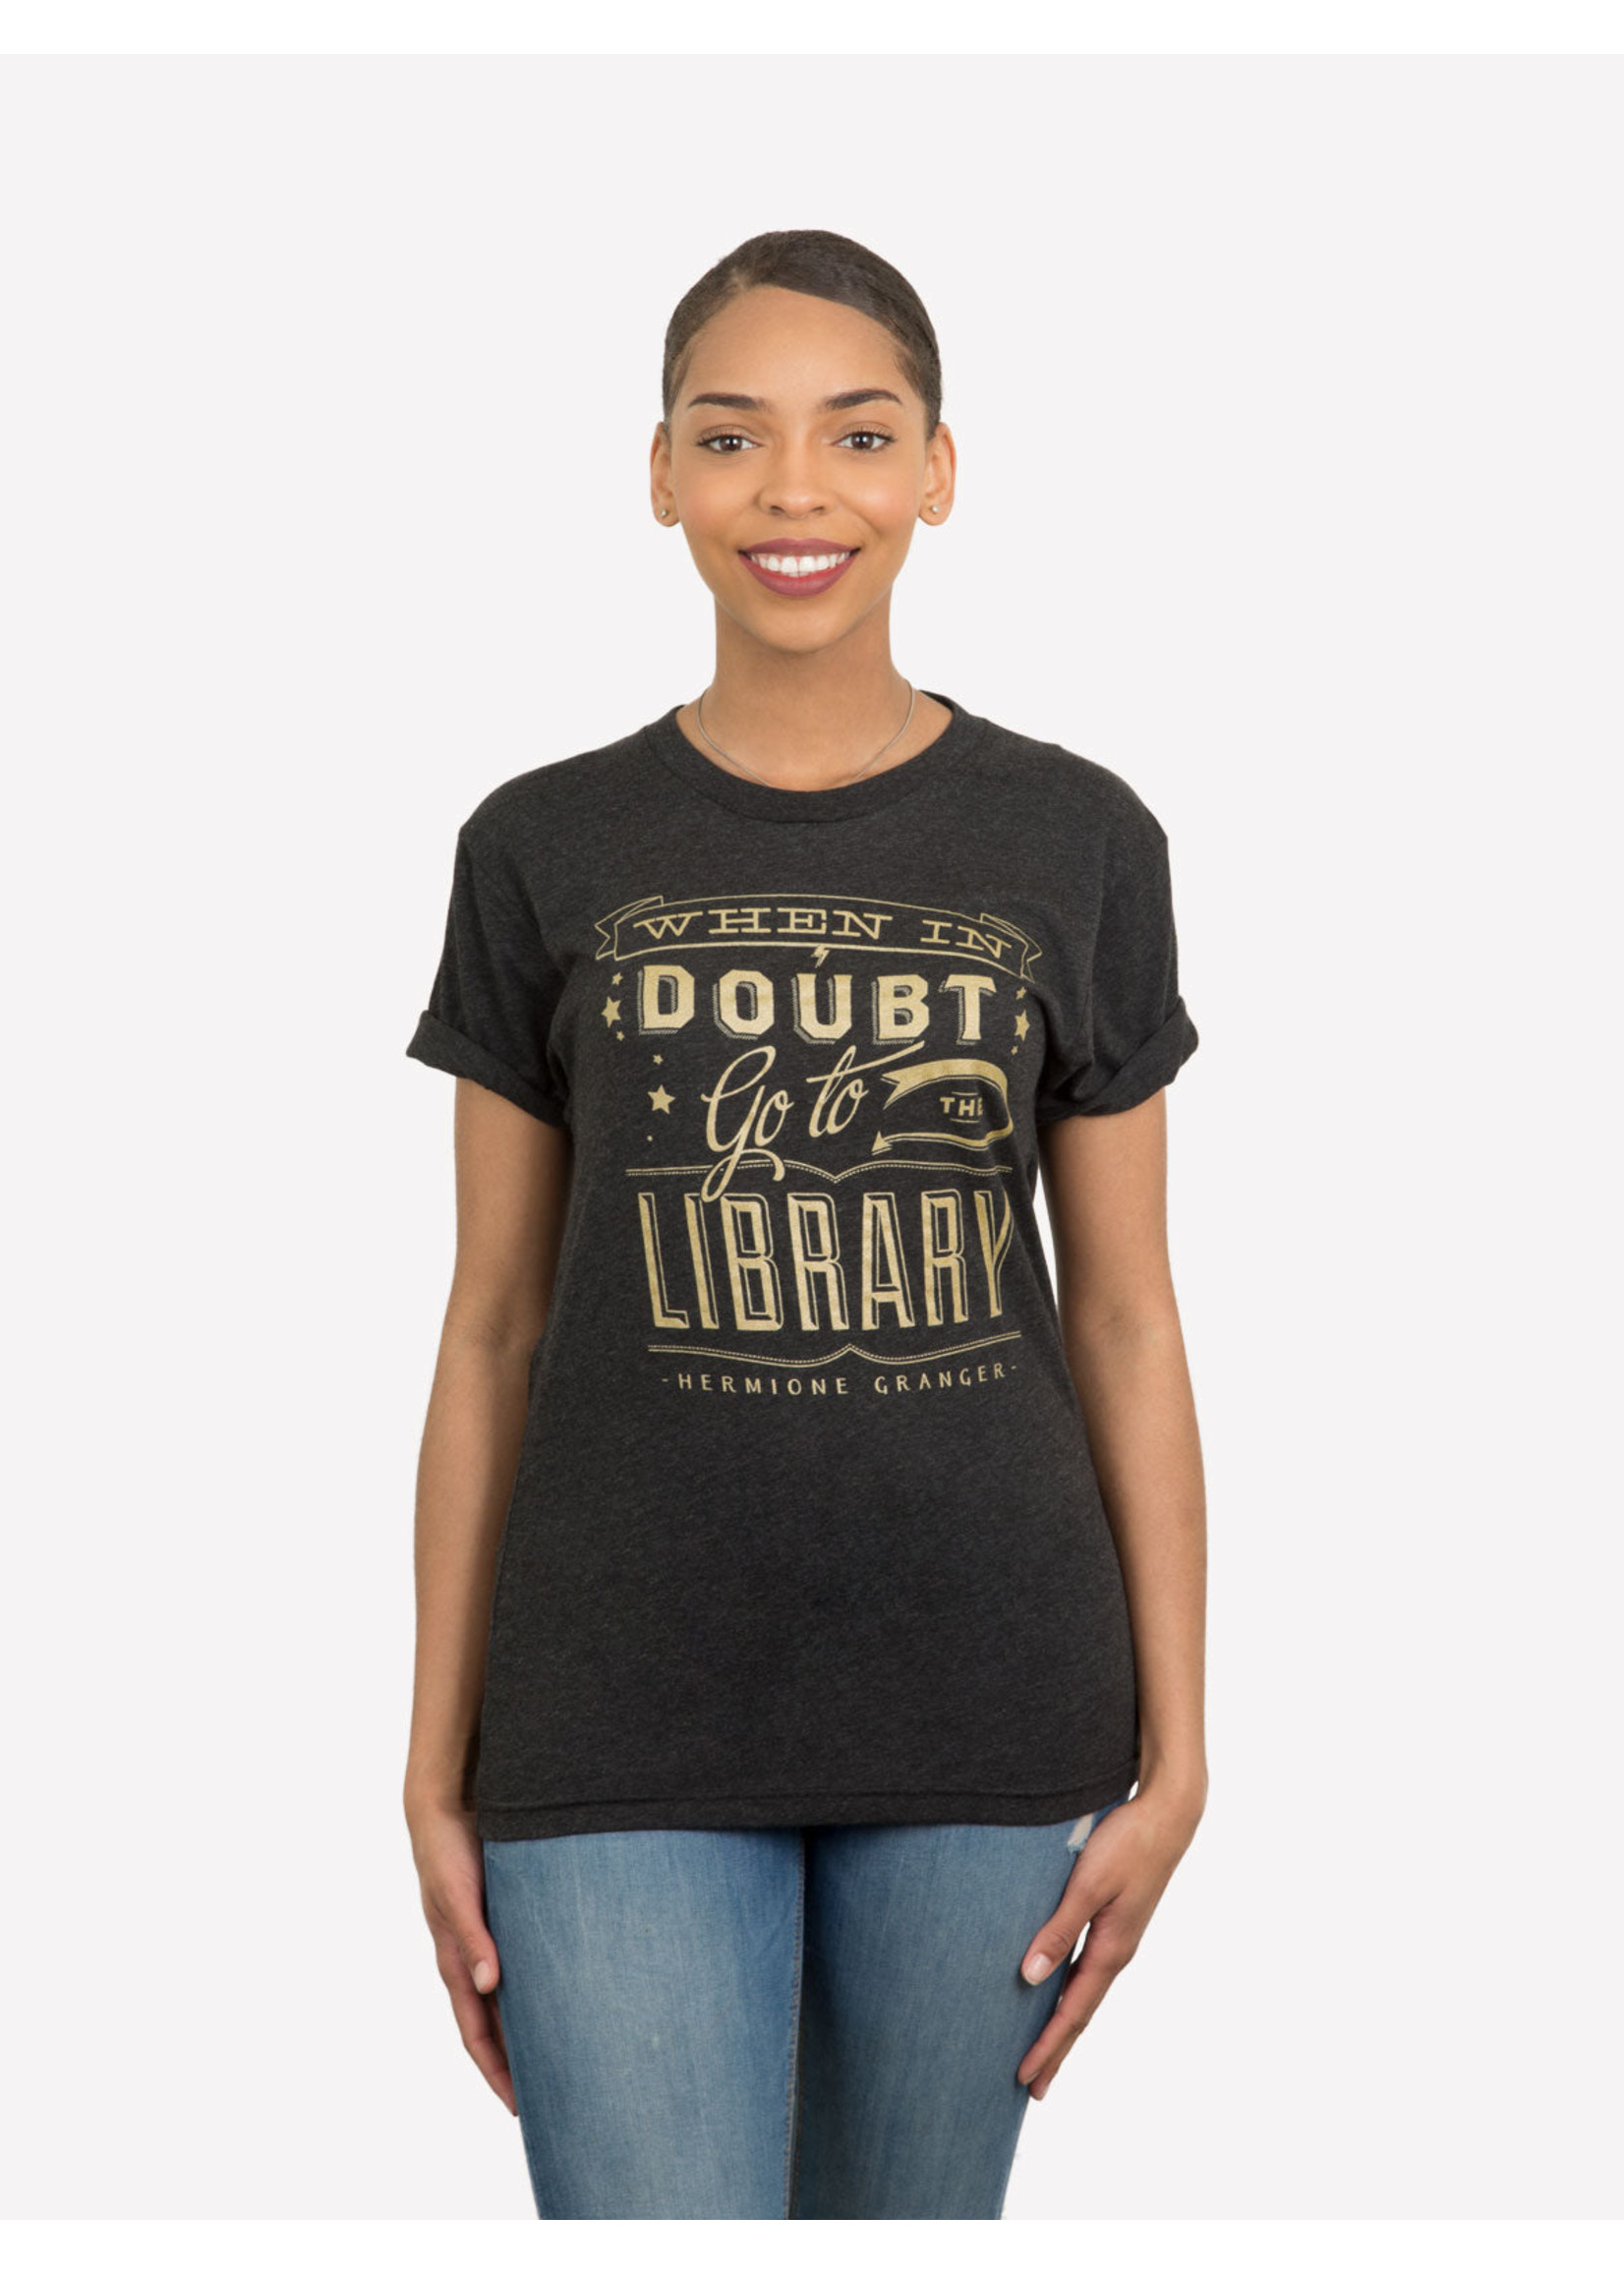 Out of Print When in Doubt T-Shirt - Adult Unisex